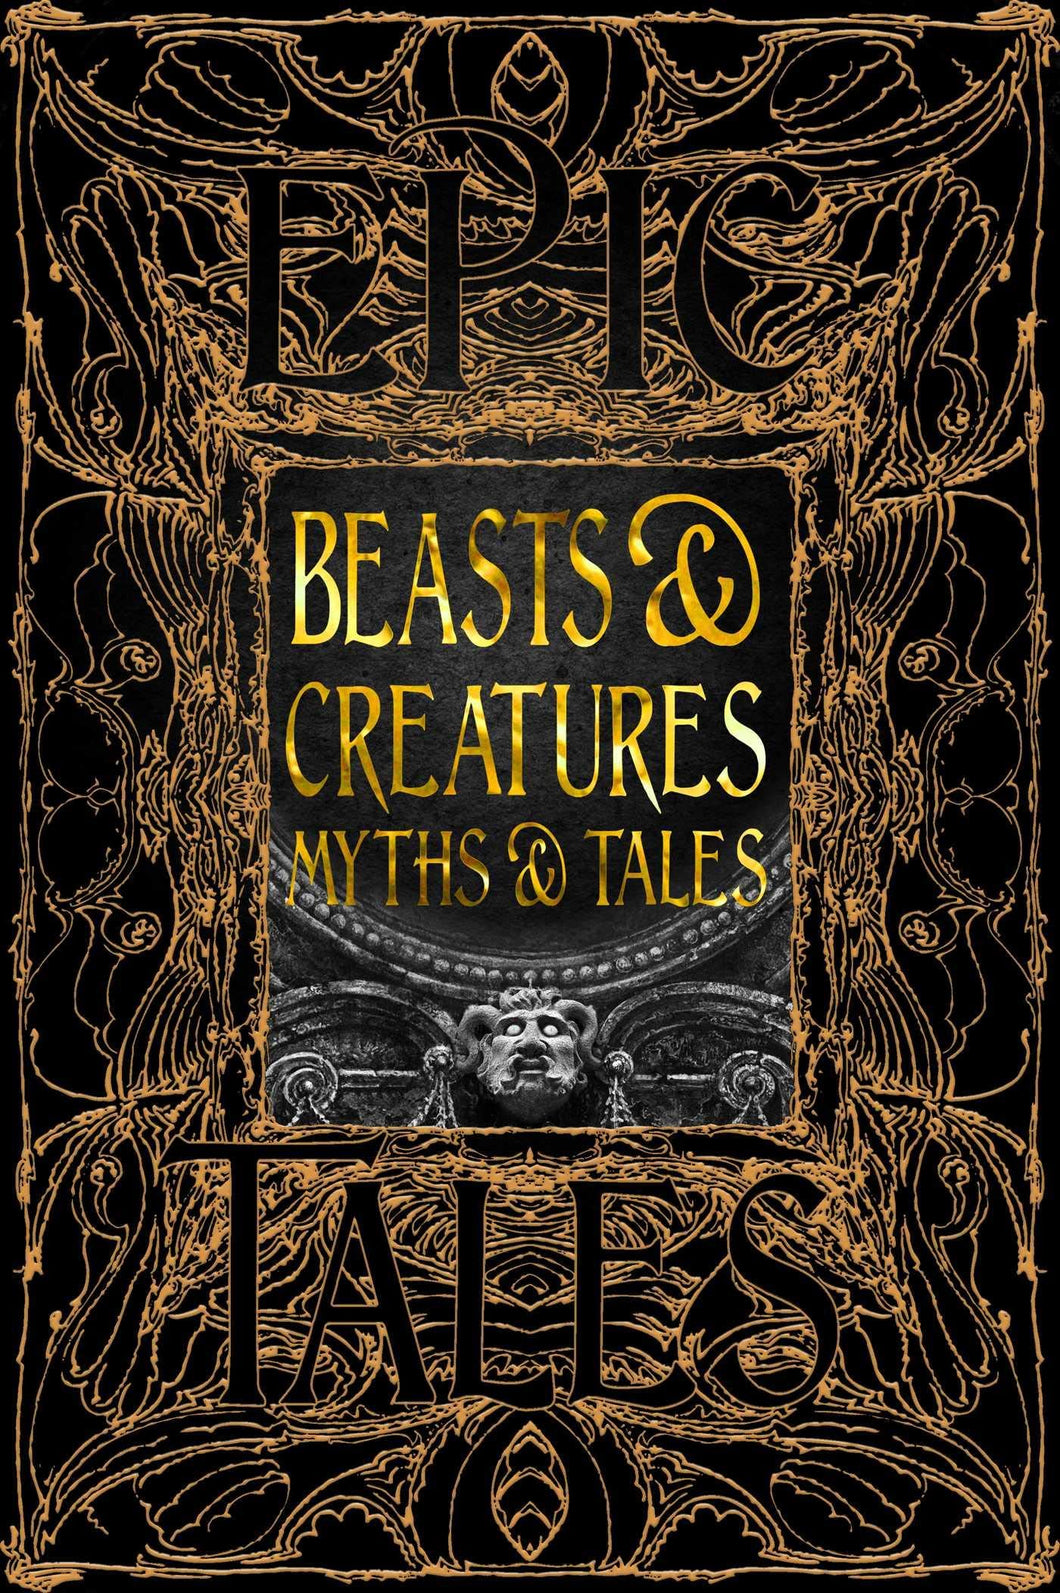 Beasts & Creatures, Myths & Tales - Epic Tales